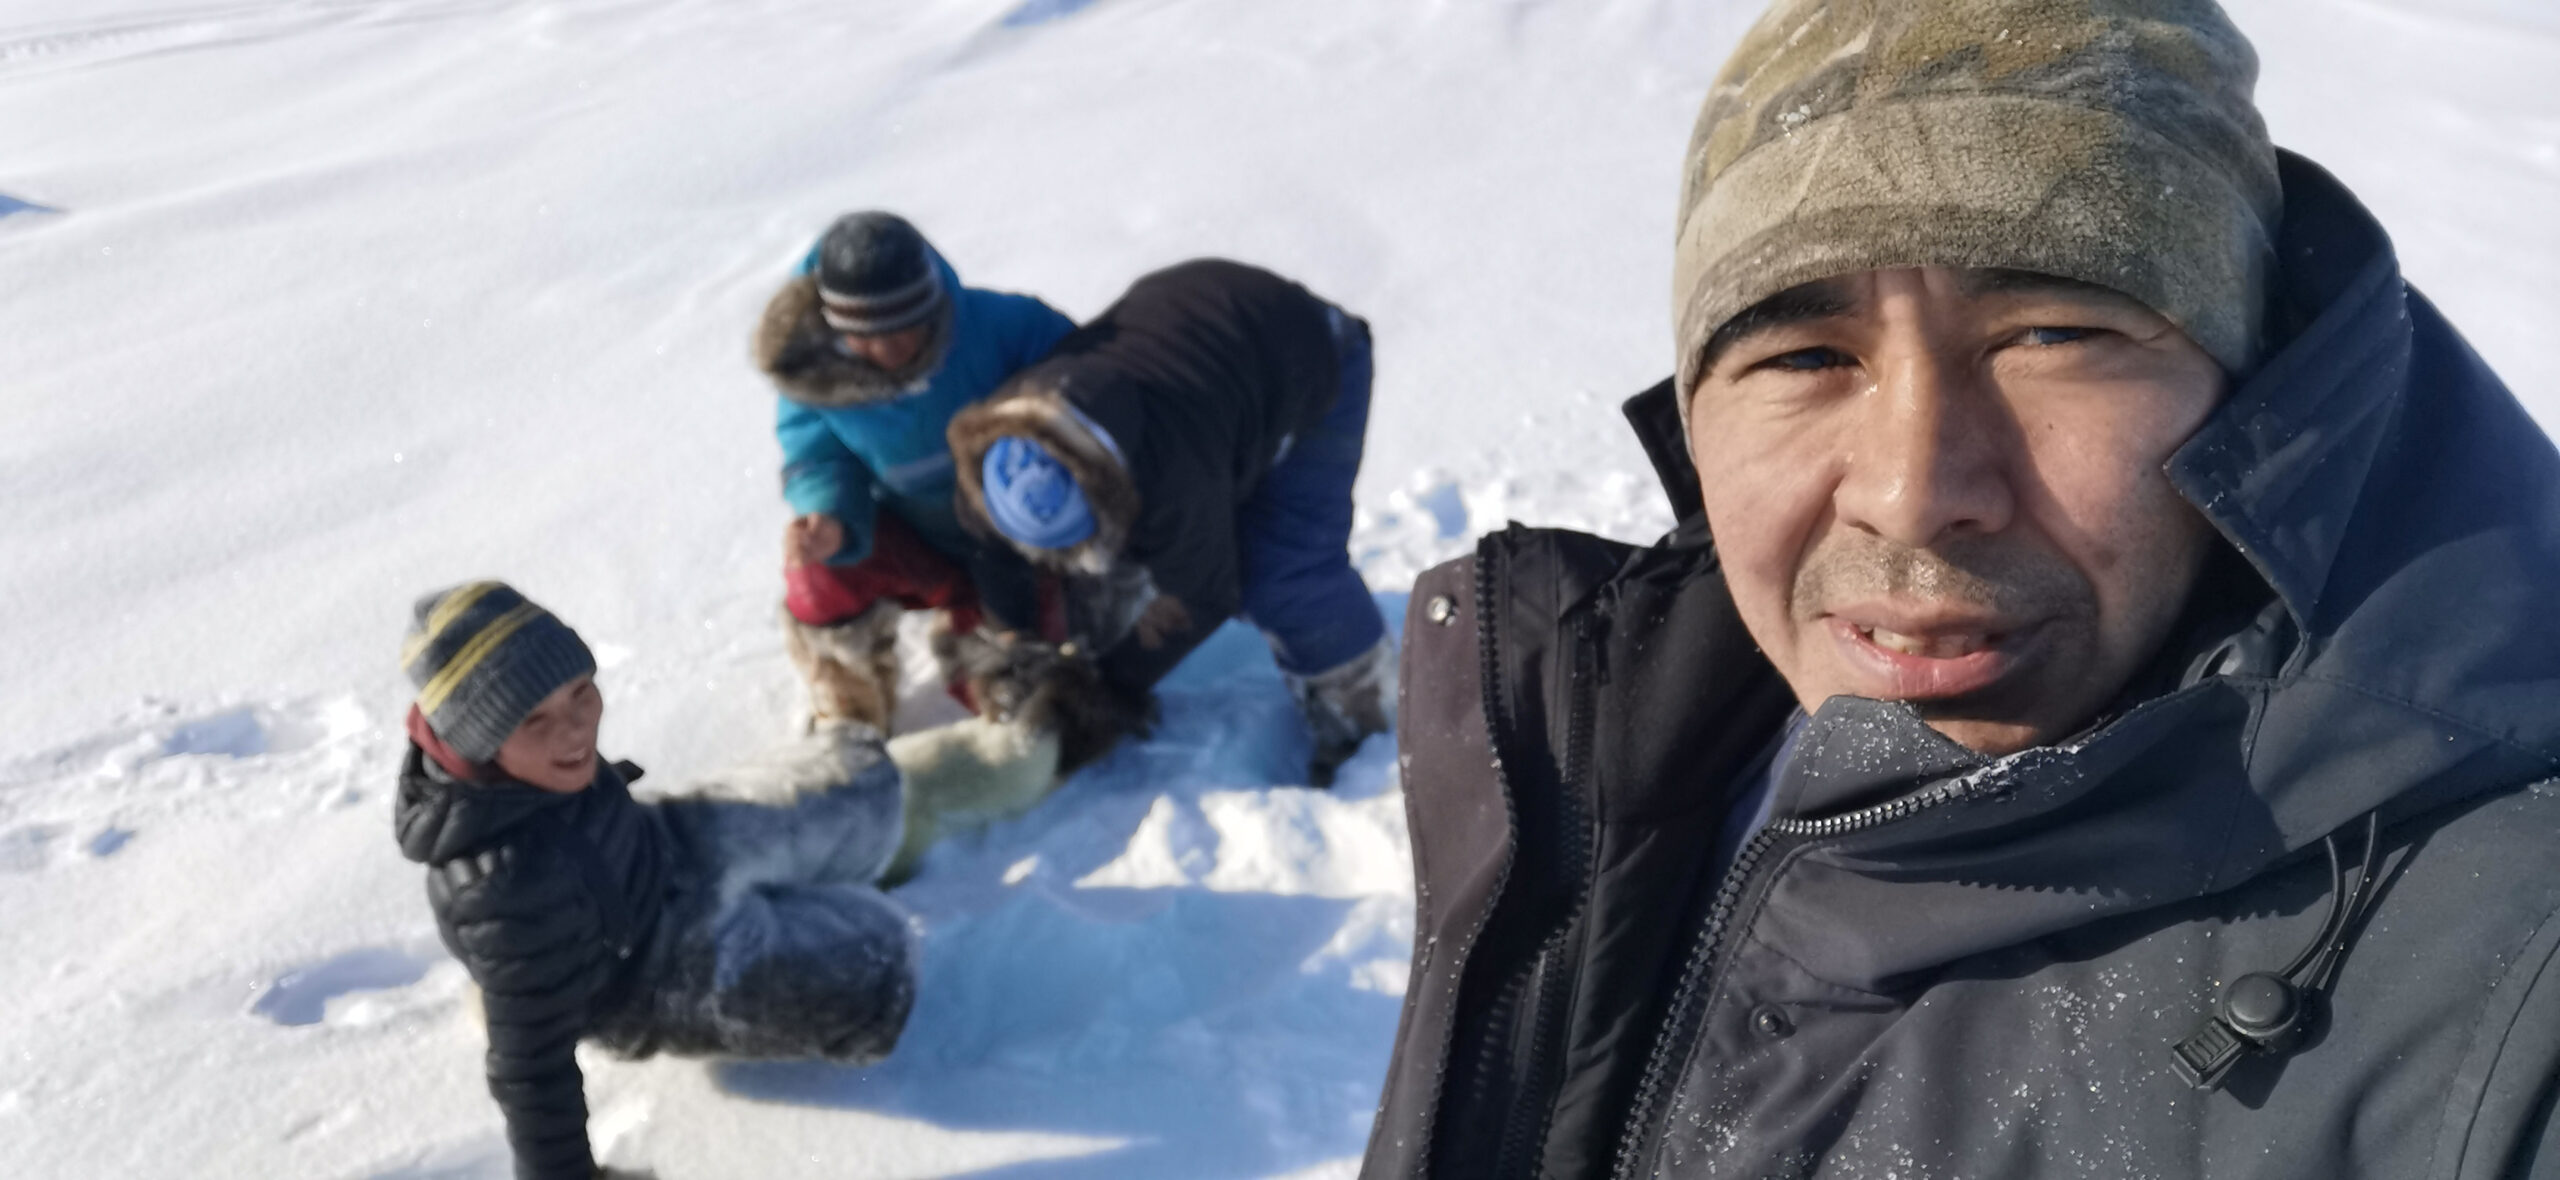 An Inuit man standing foreground with children behind him playing in the snow